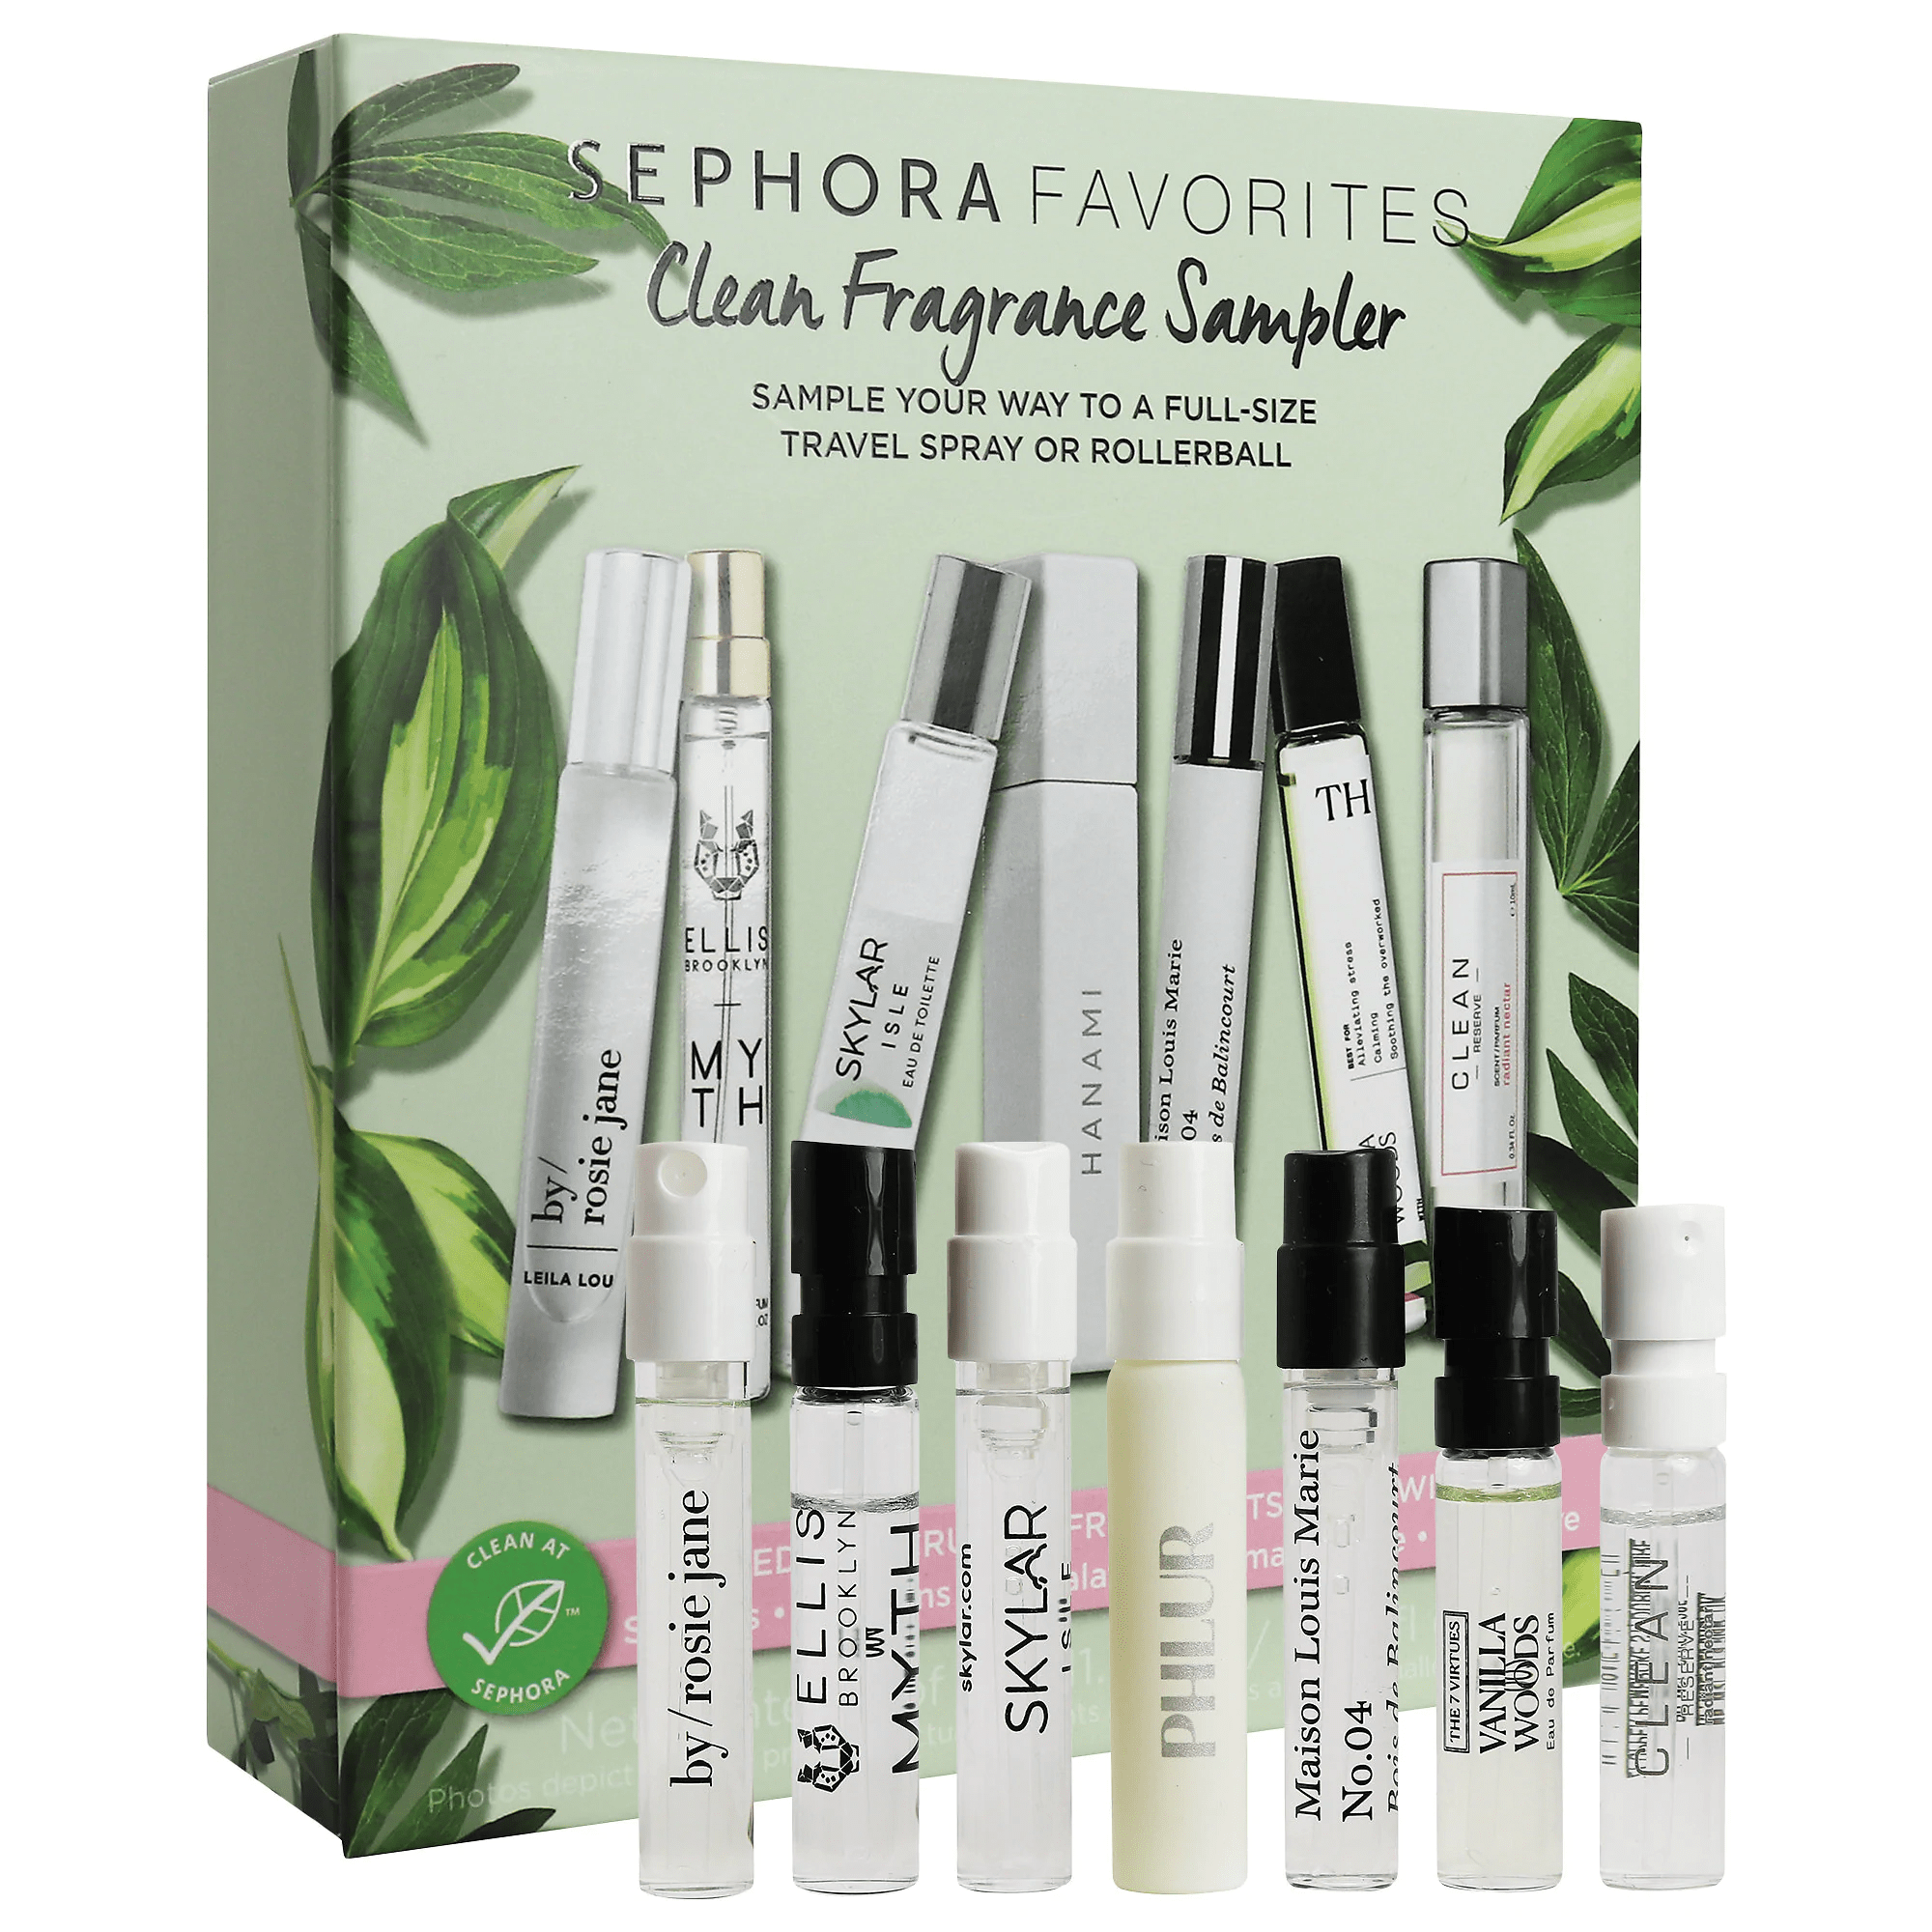 Mini Clean Perfume Sampler Set: New Sephora Kit Available Now + Coupons! - hello subscription